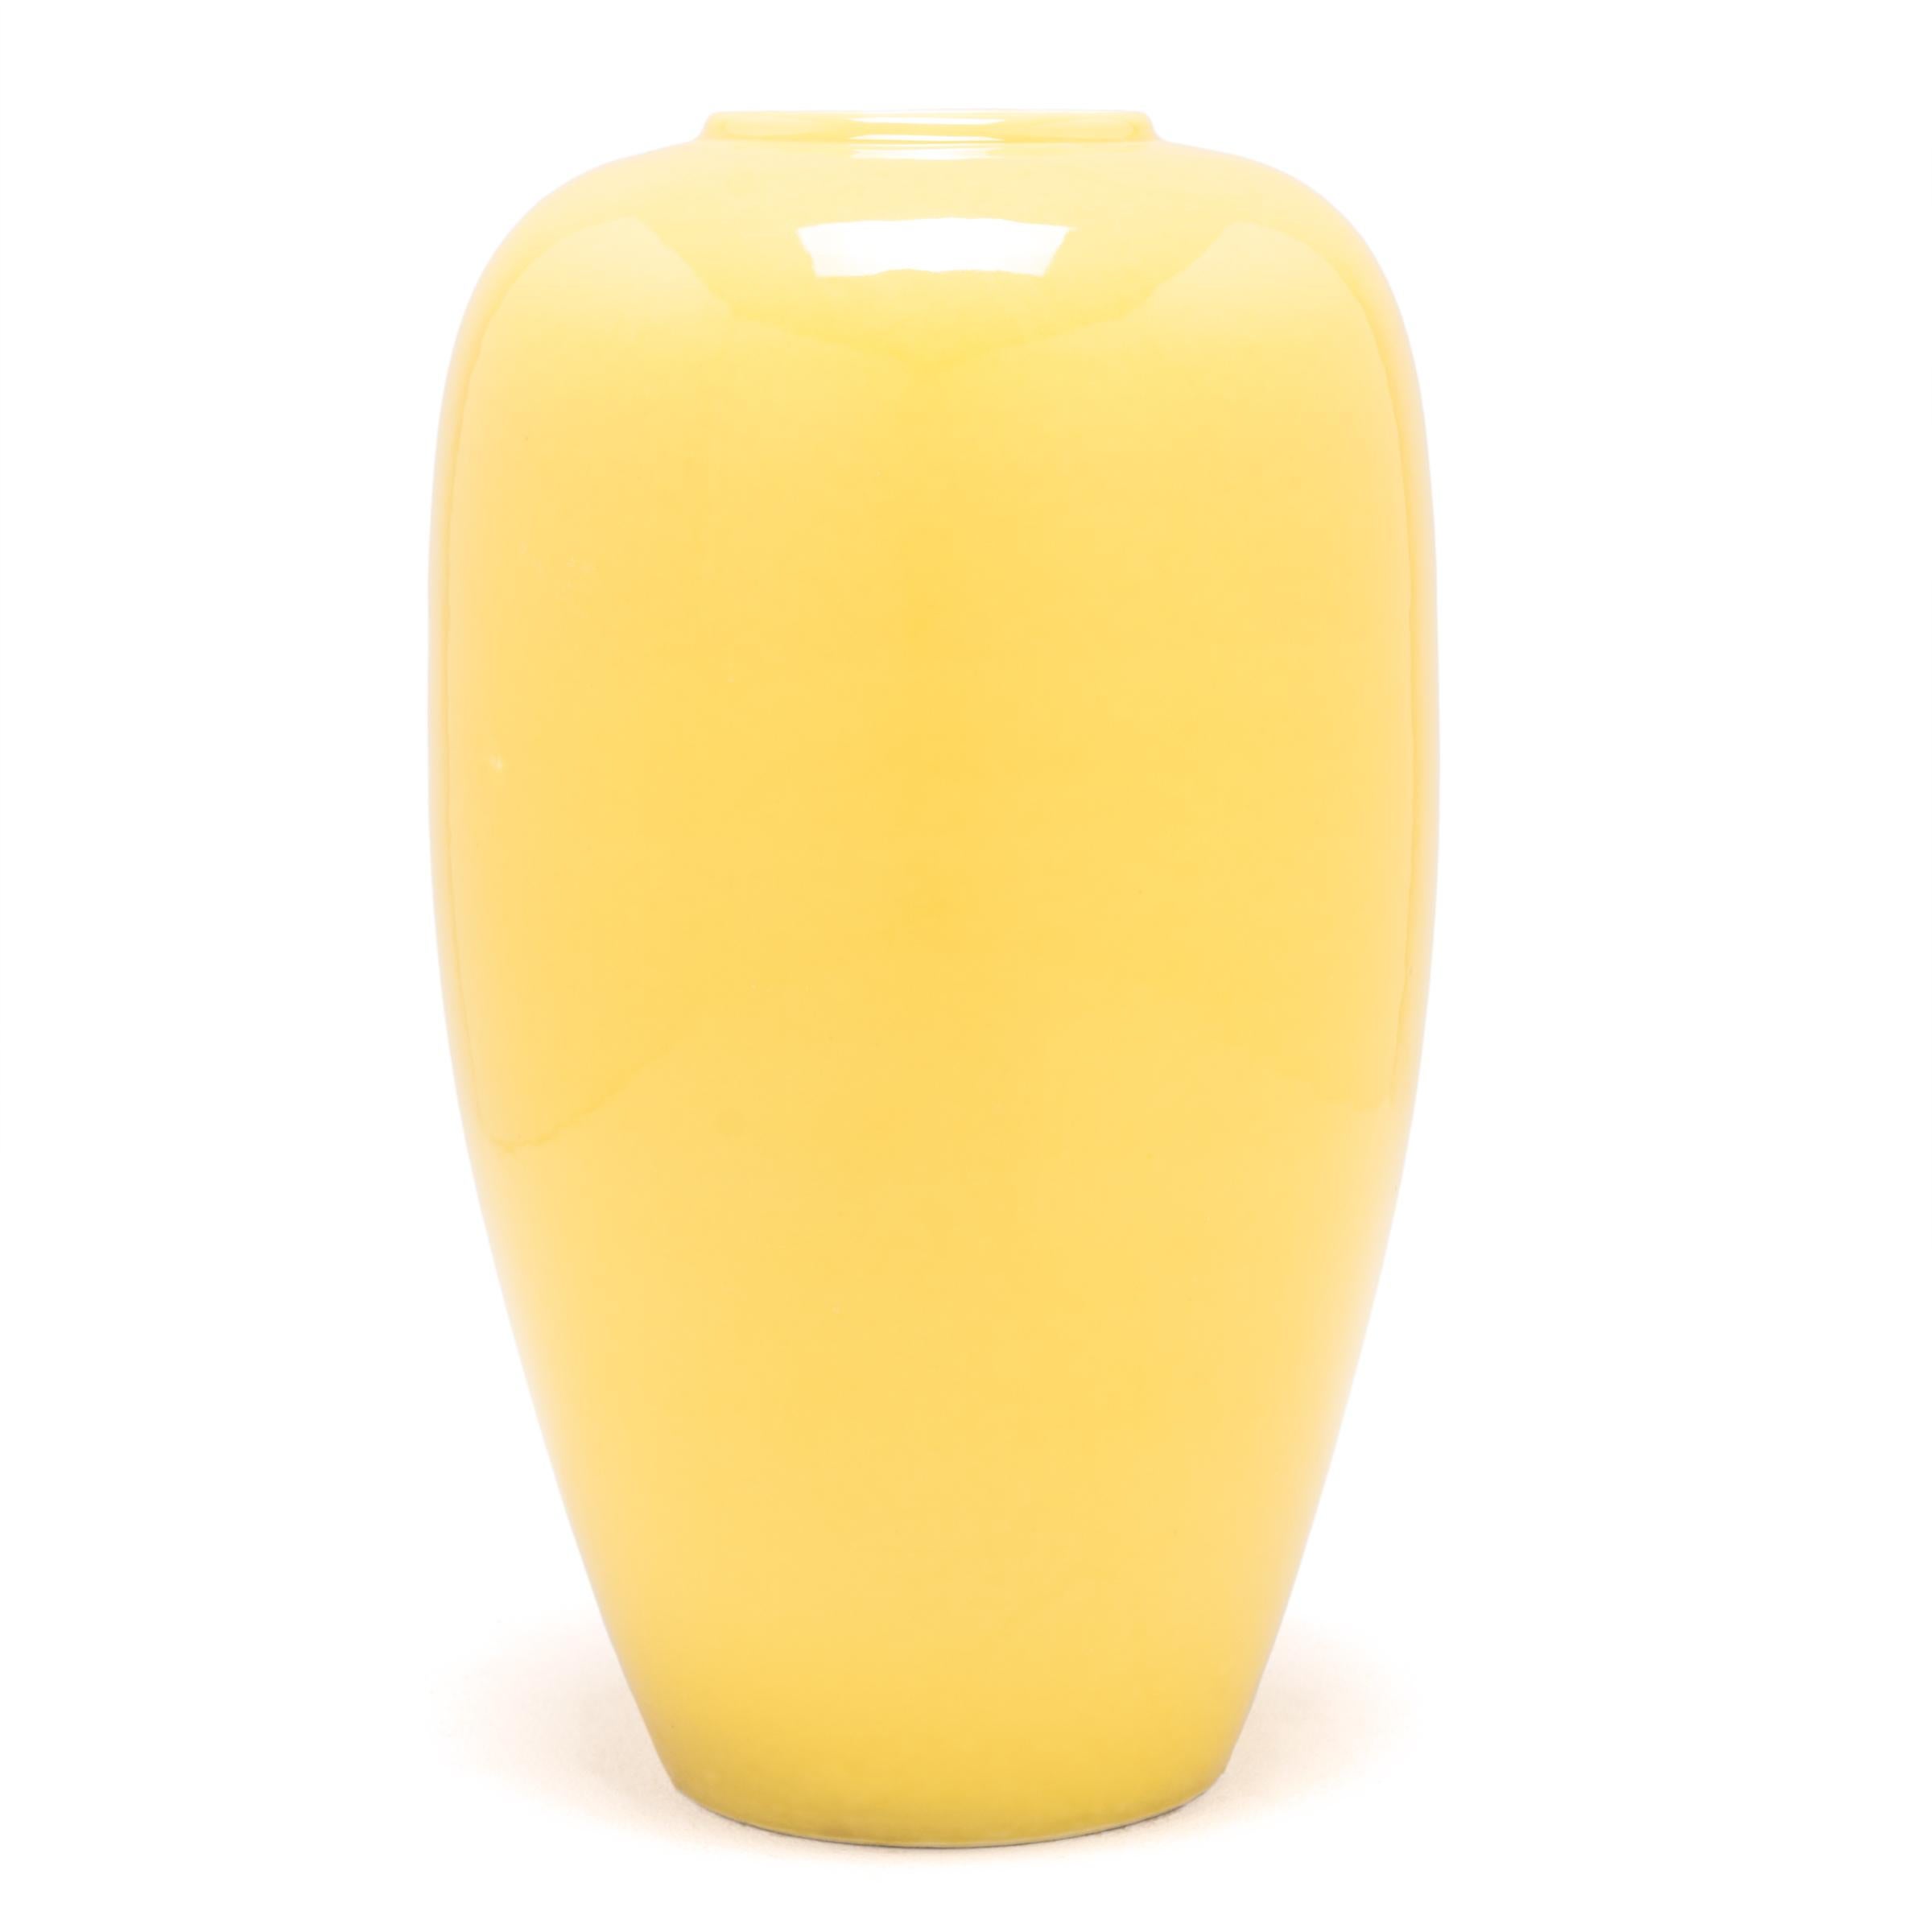 Sunny citron glaze coats the subtle taper of this Classic vase in brilliant color. Formed in a traditional porcelain shape, the contemporary vase celebrates the revered history of Chinese monochrome ceramics with vibrant citron yellow, a perfect way